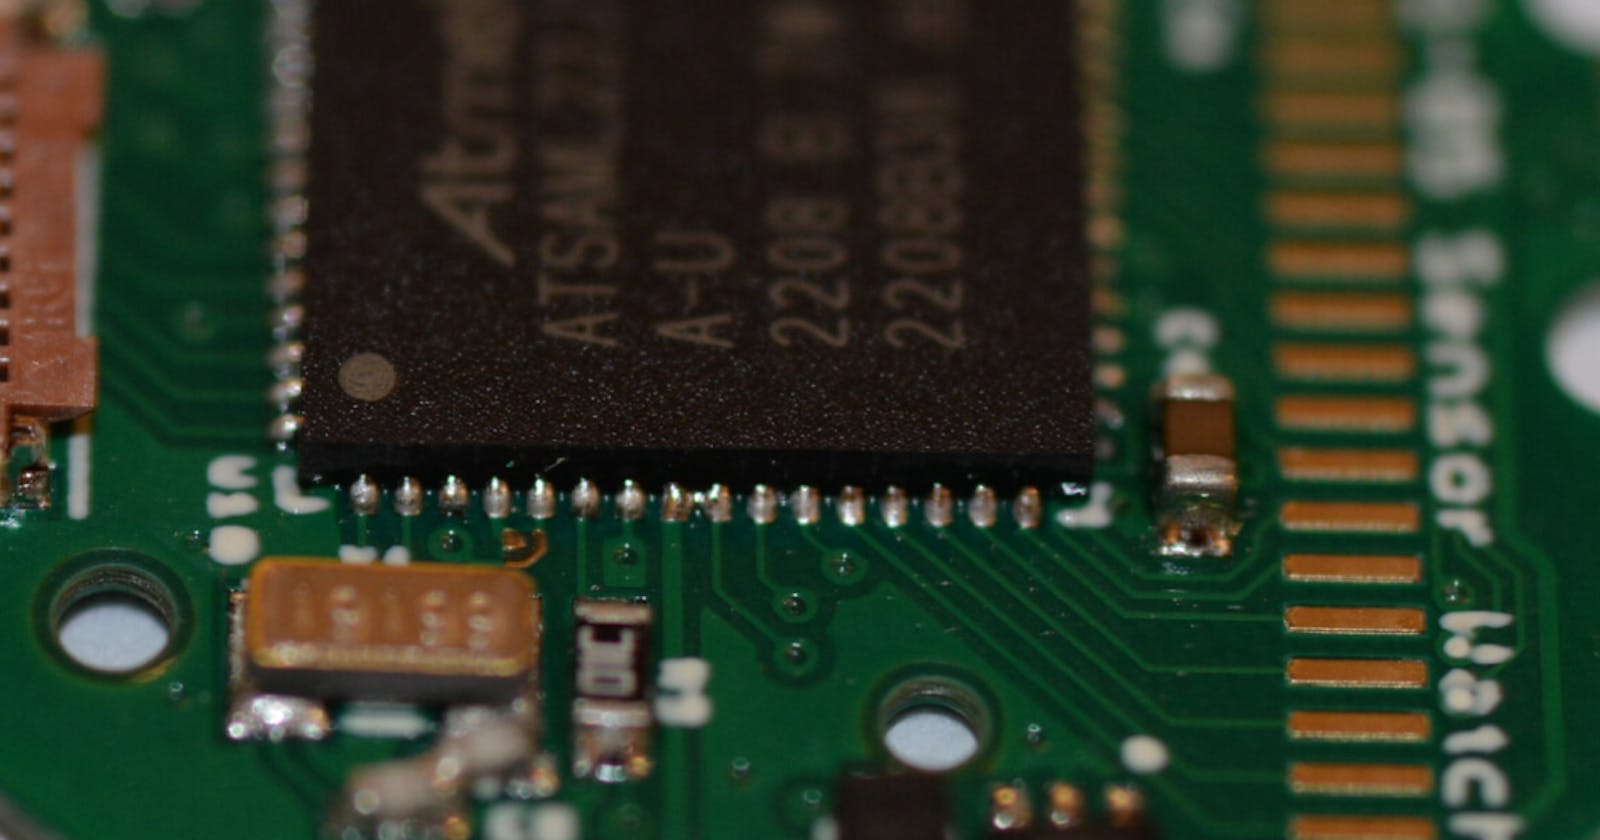 Embedded Systems Weekly #114